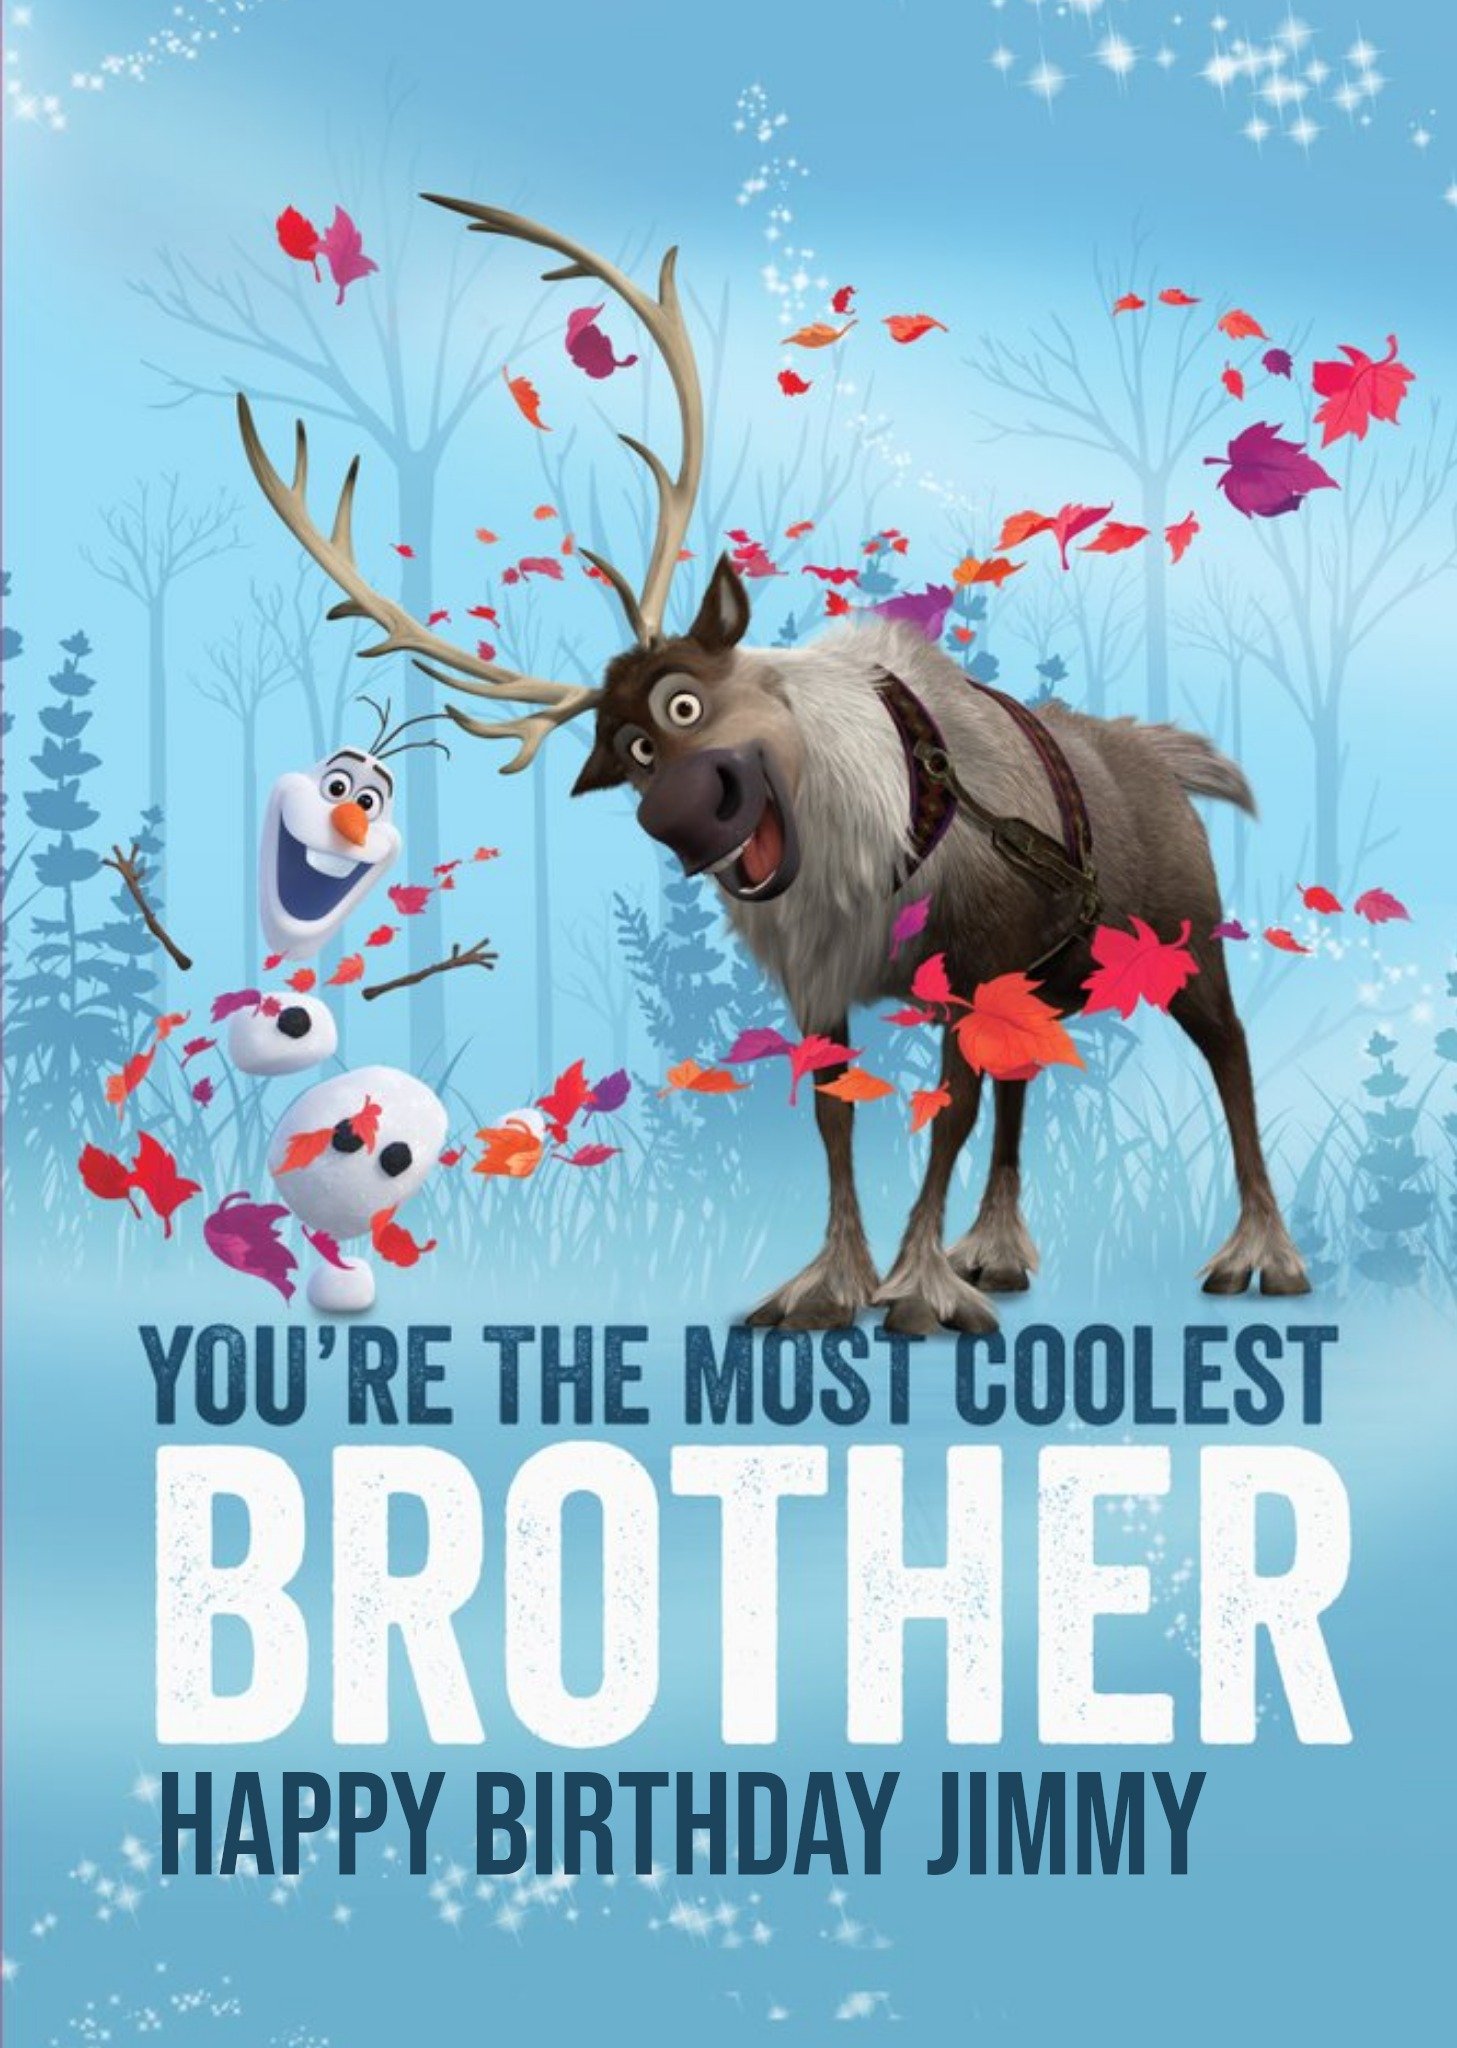 Disney Frozen 2 Sven And Olaf Coolest Brother Birthday Card, Large